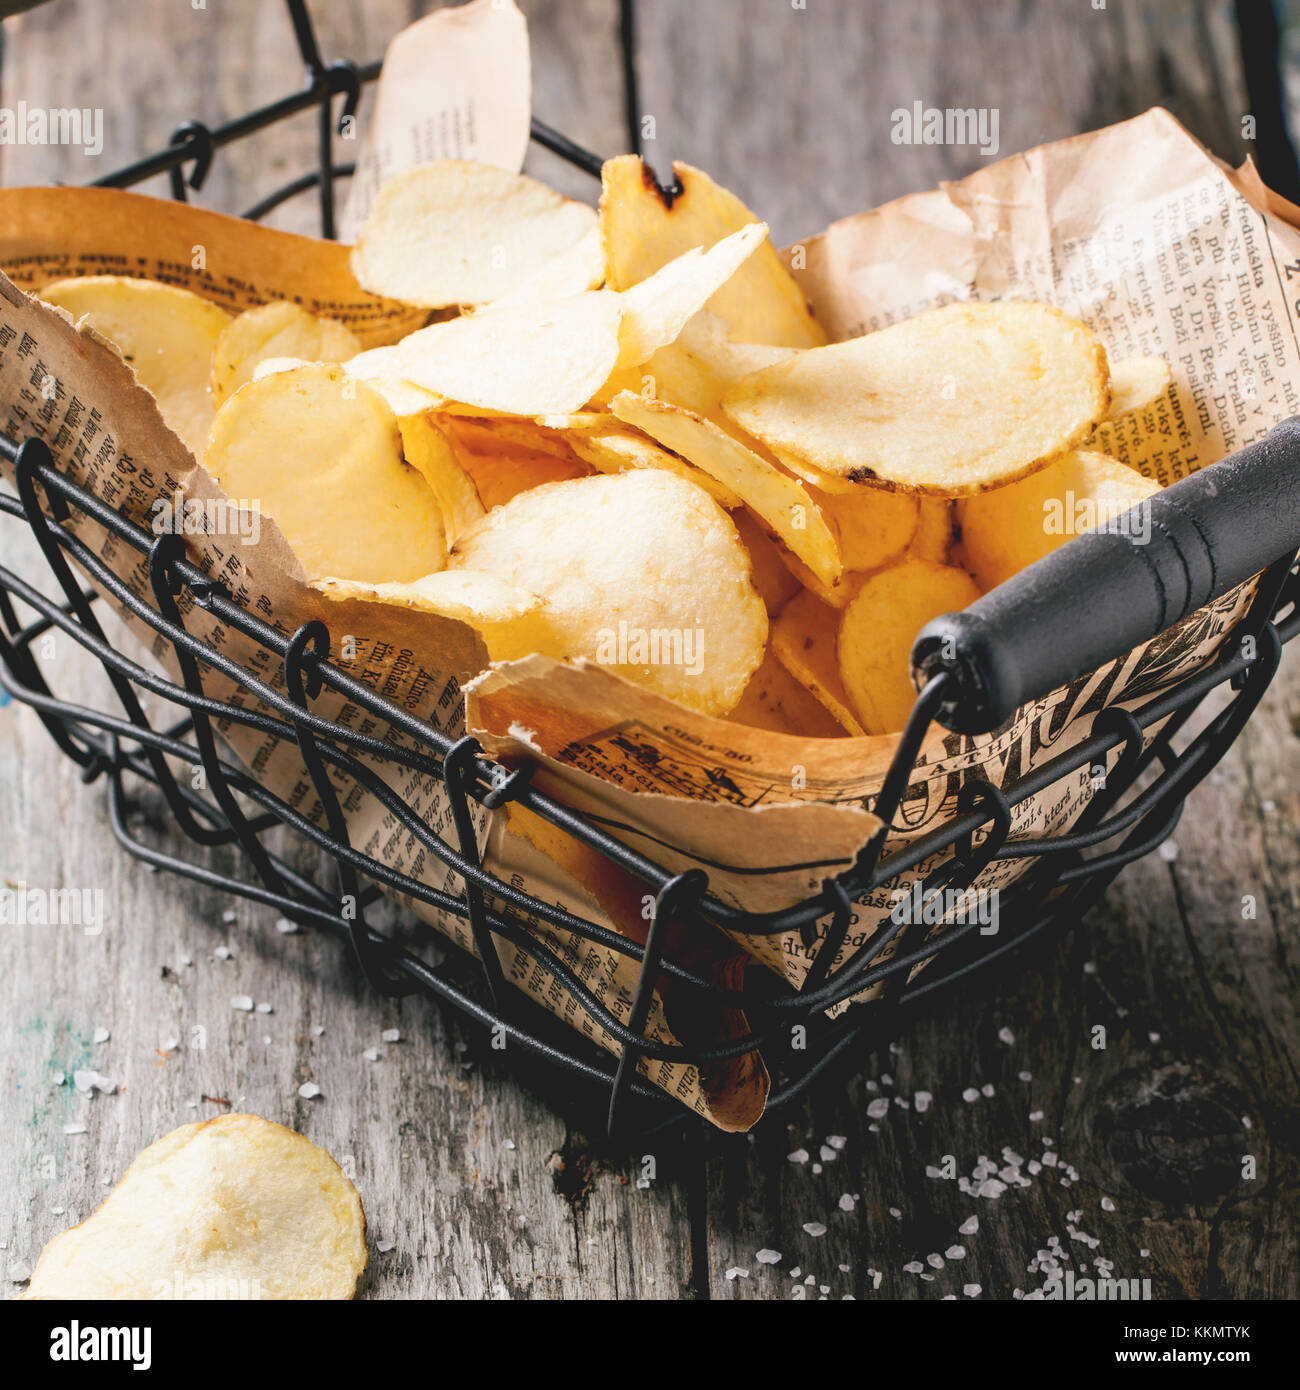 Basket with potato chips with sea salt over old wooden table. Square image with selective focus Stock Photo